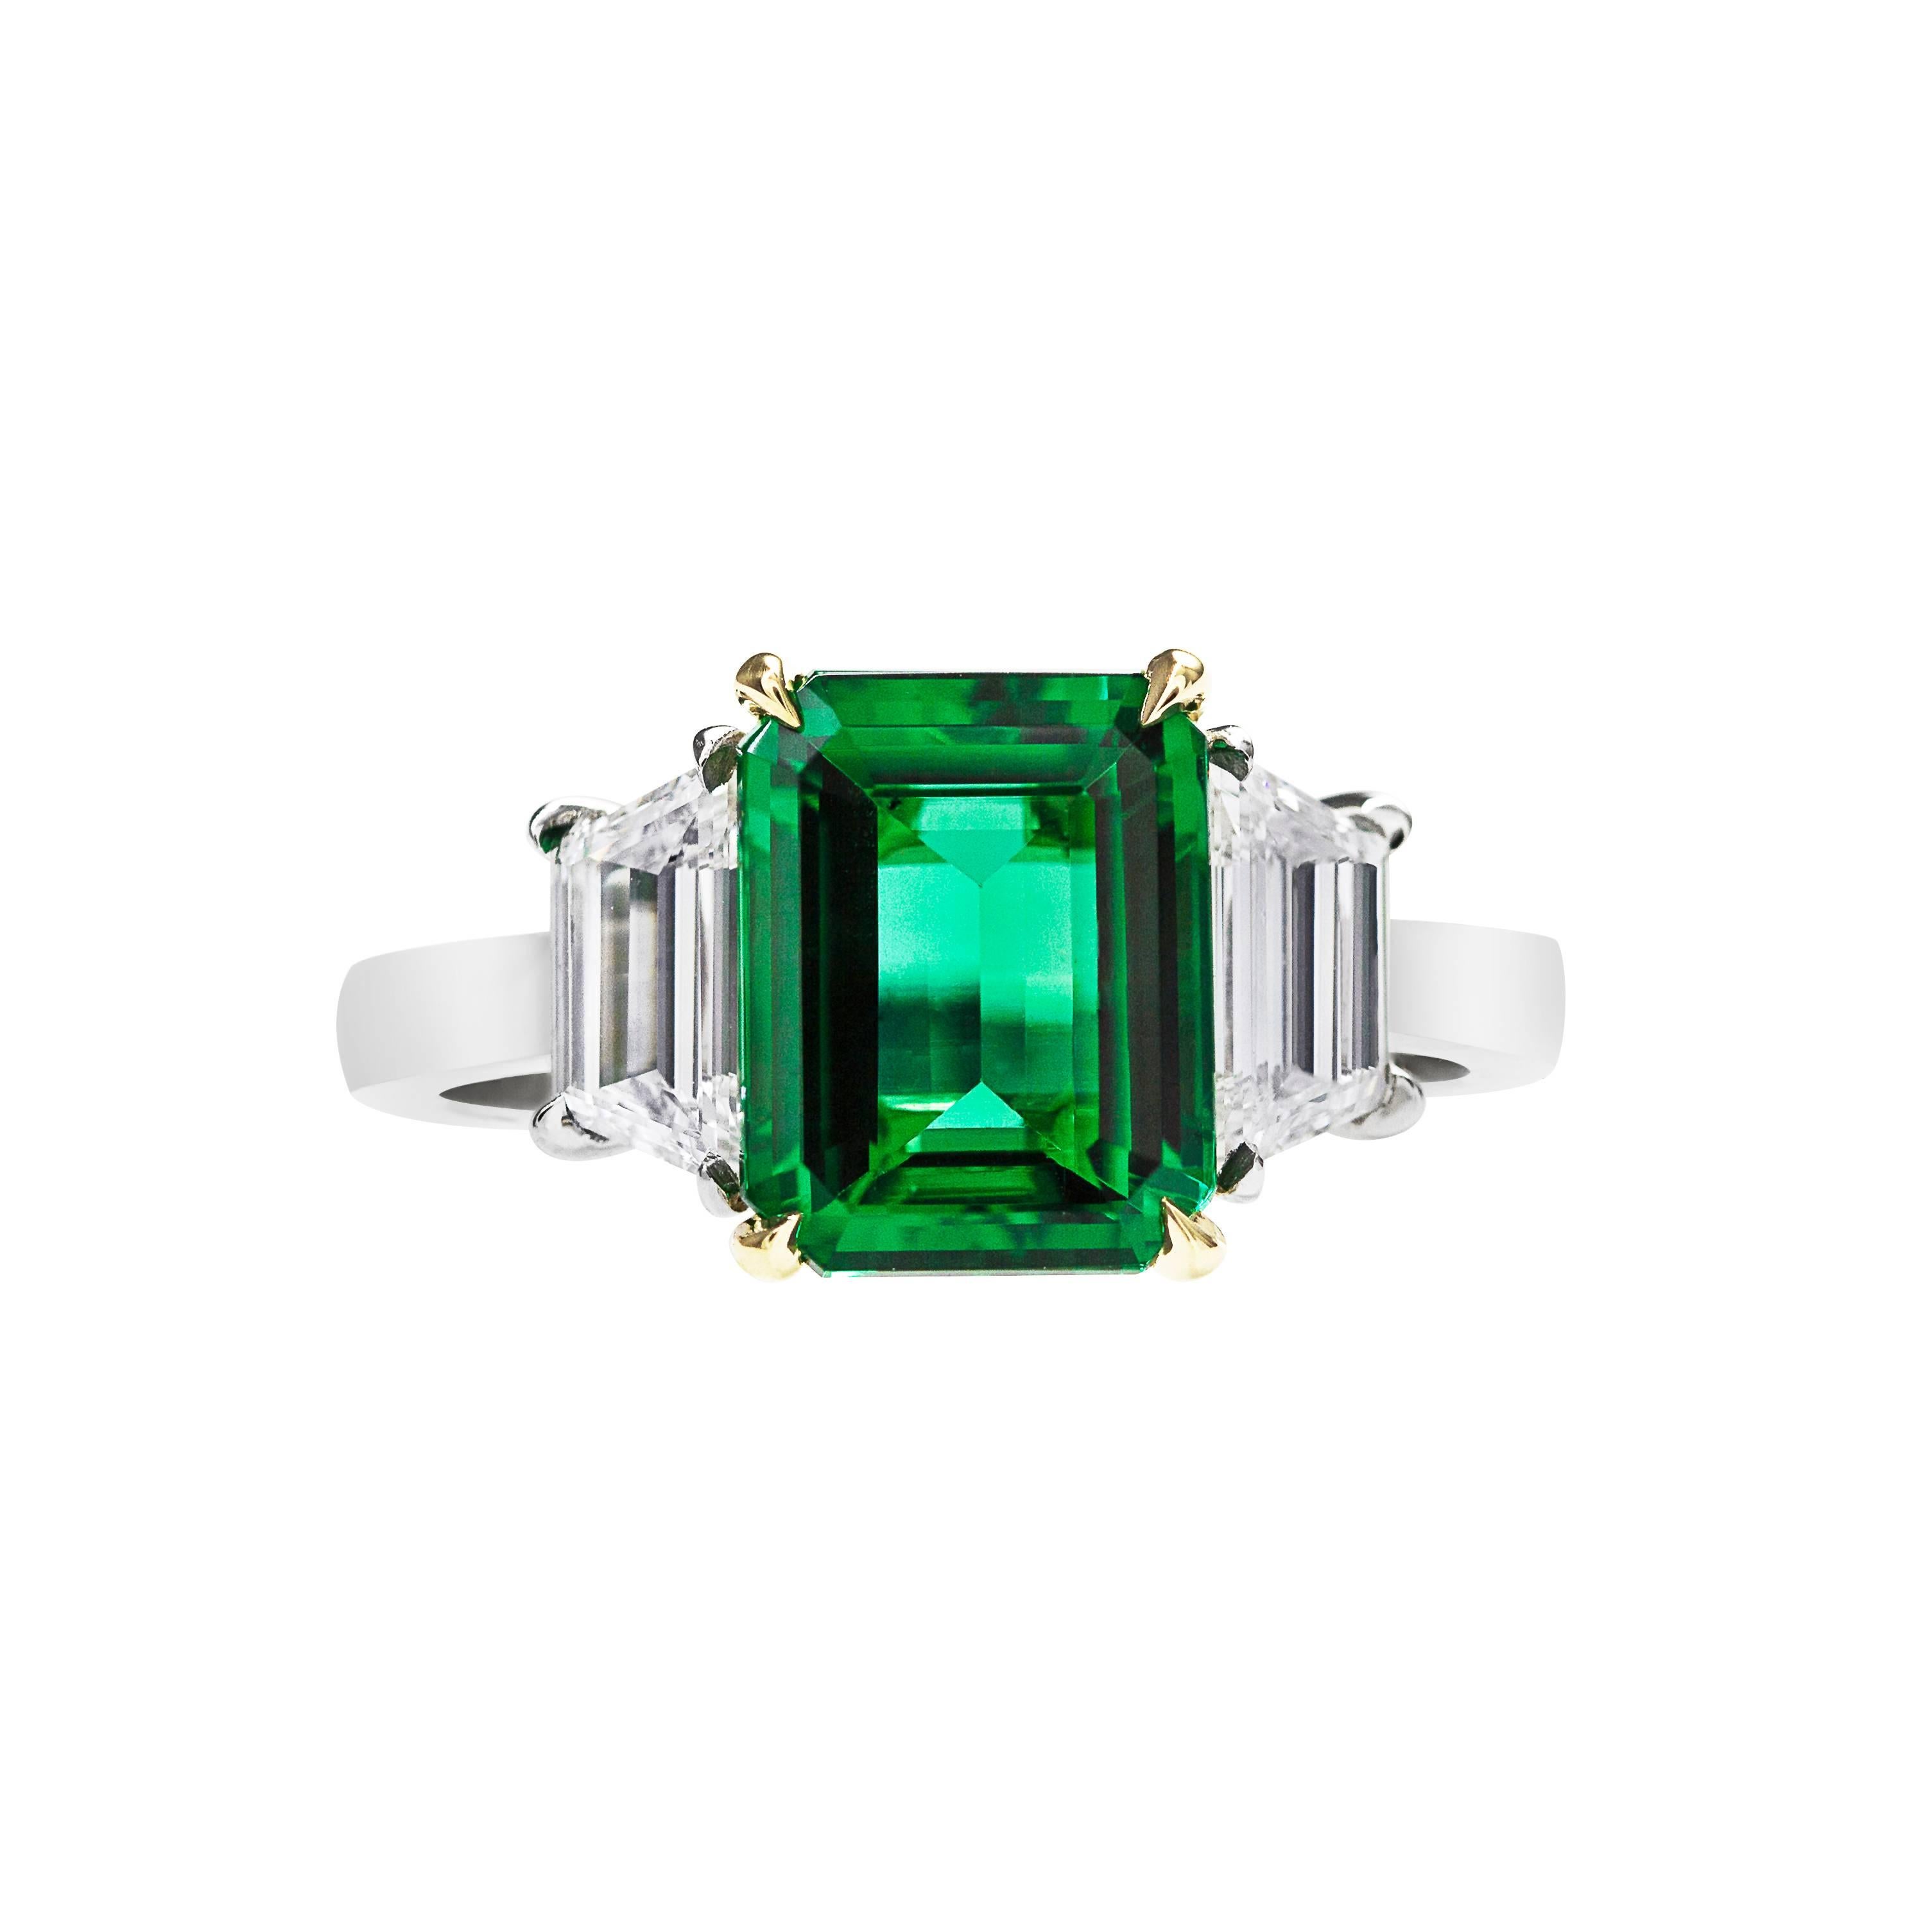 Features a gorgeous emerald cut emerald gemstone weighing 2.62 carats that AGL certified as Green color with no indication of treatment being done on the stone. An extravagant stone that is eye clean and loop clean. The emerald is flanked by